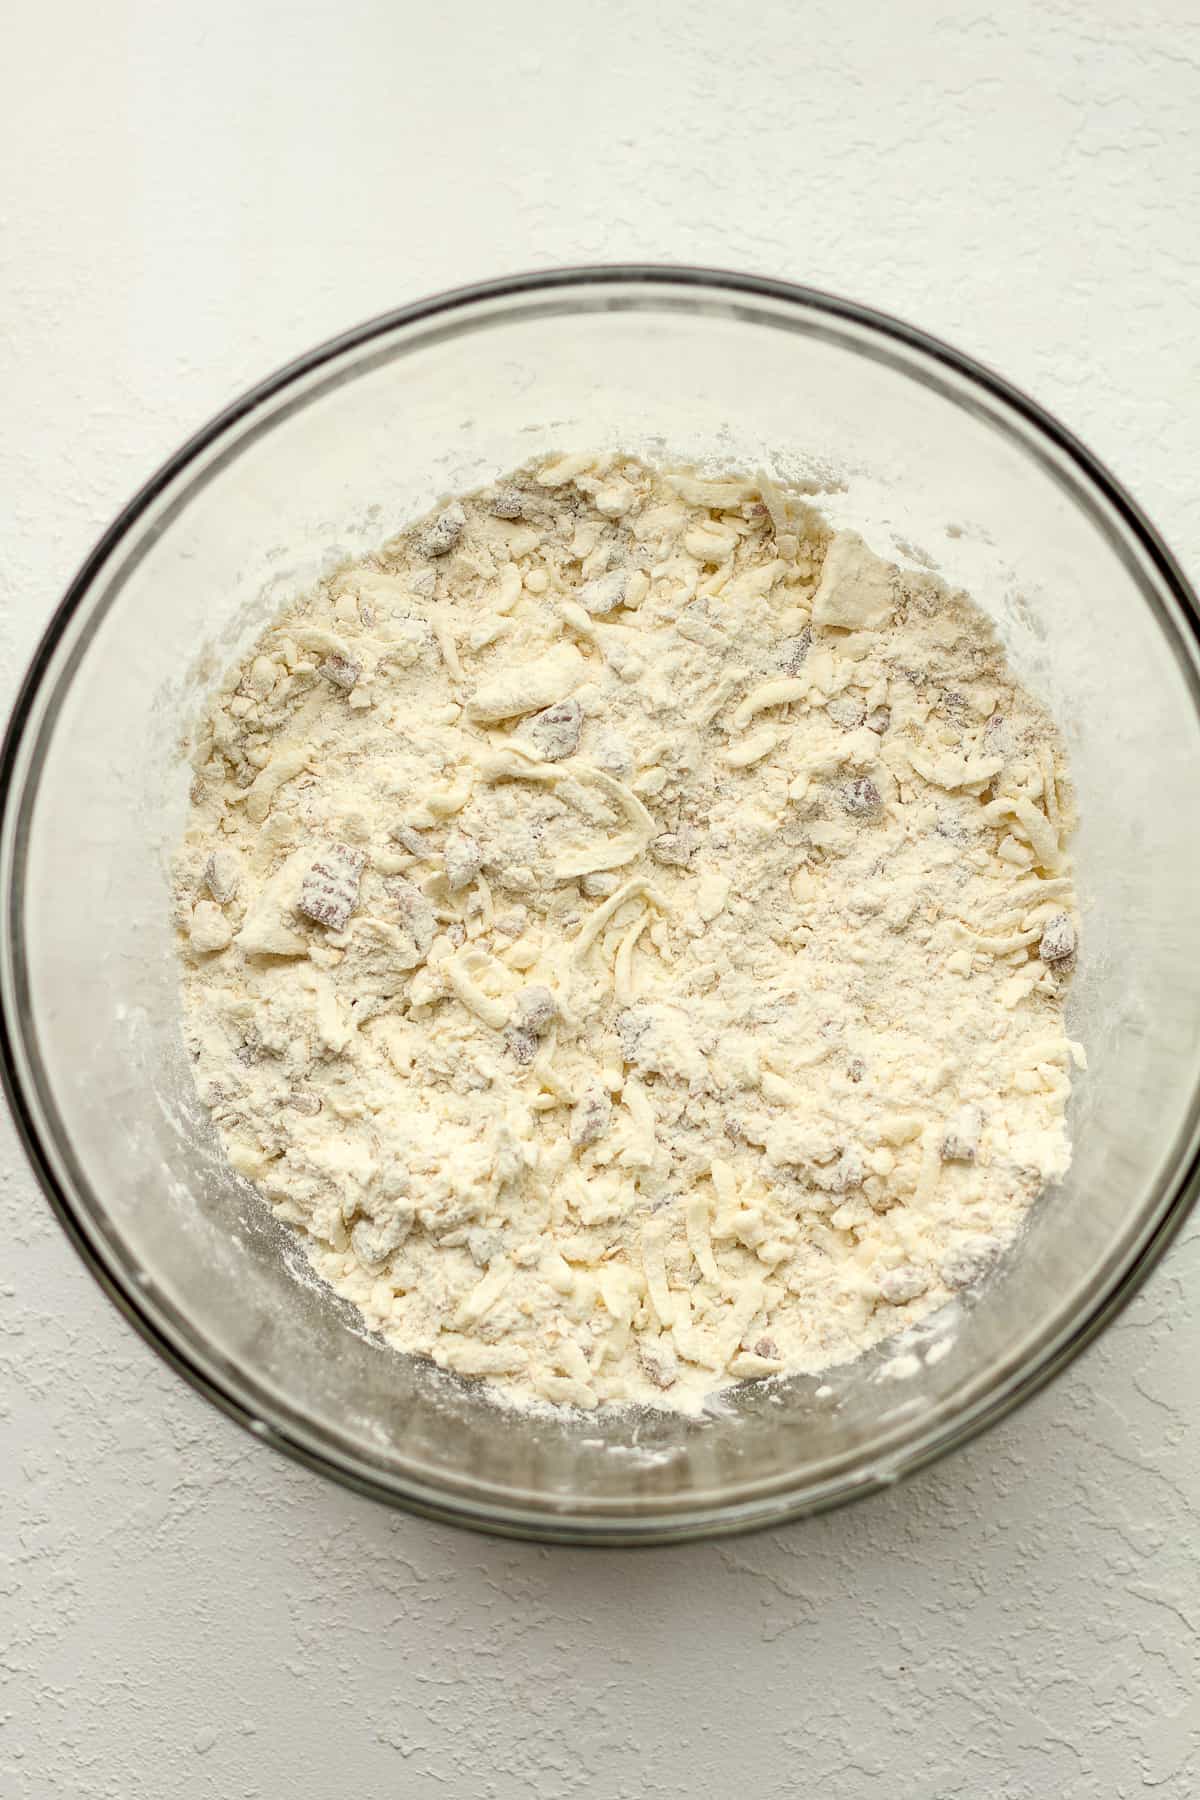 A bowl of the dry scone mixture.